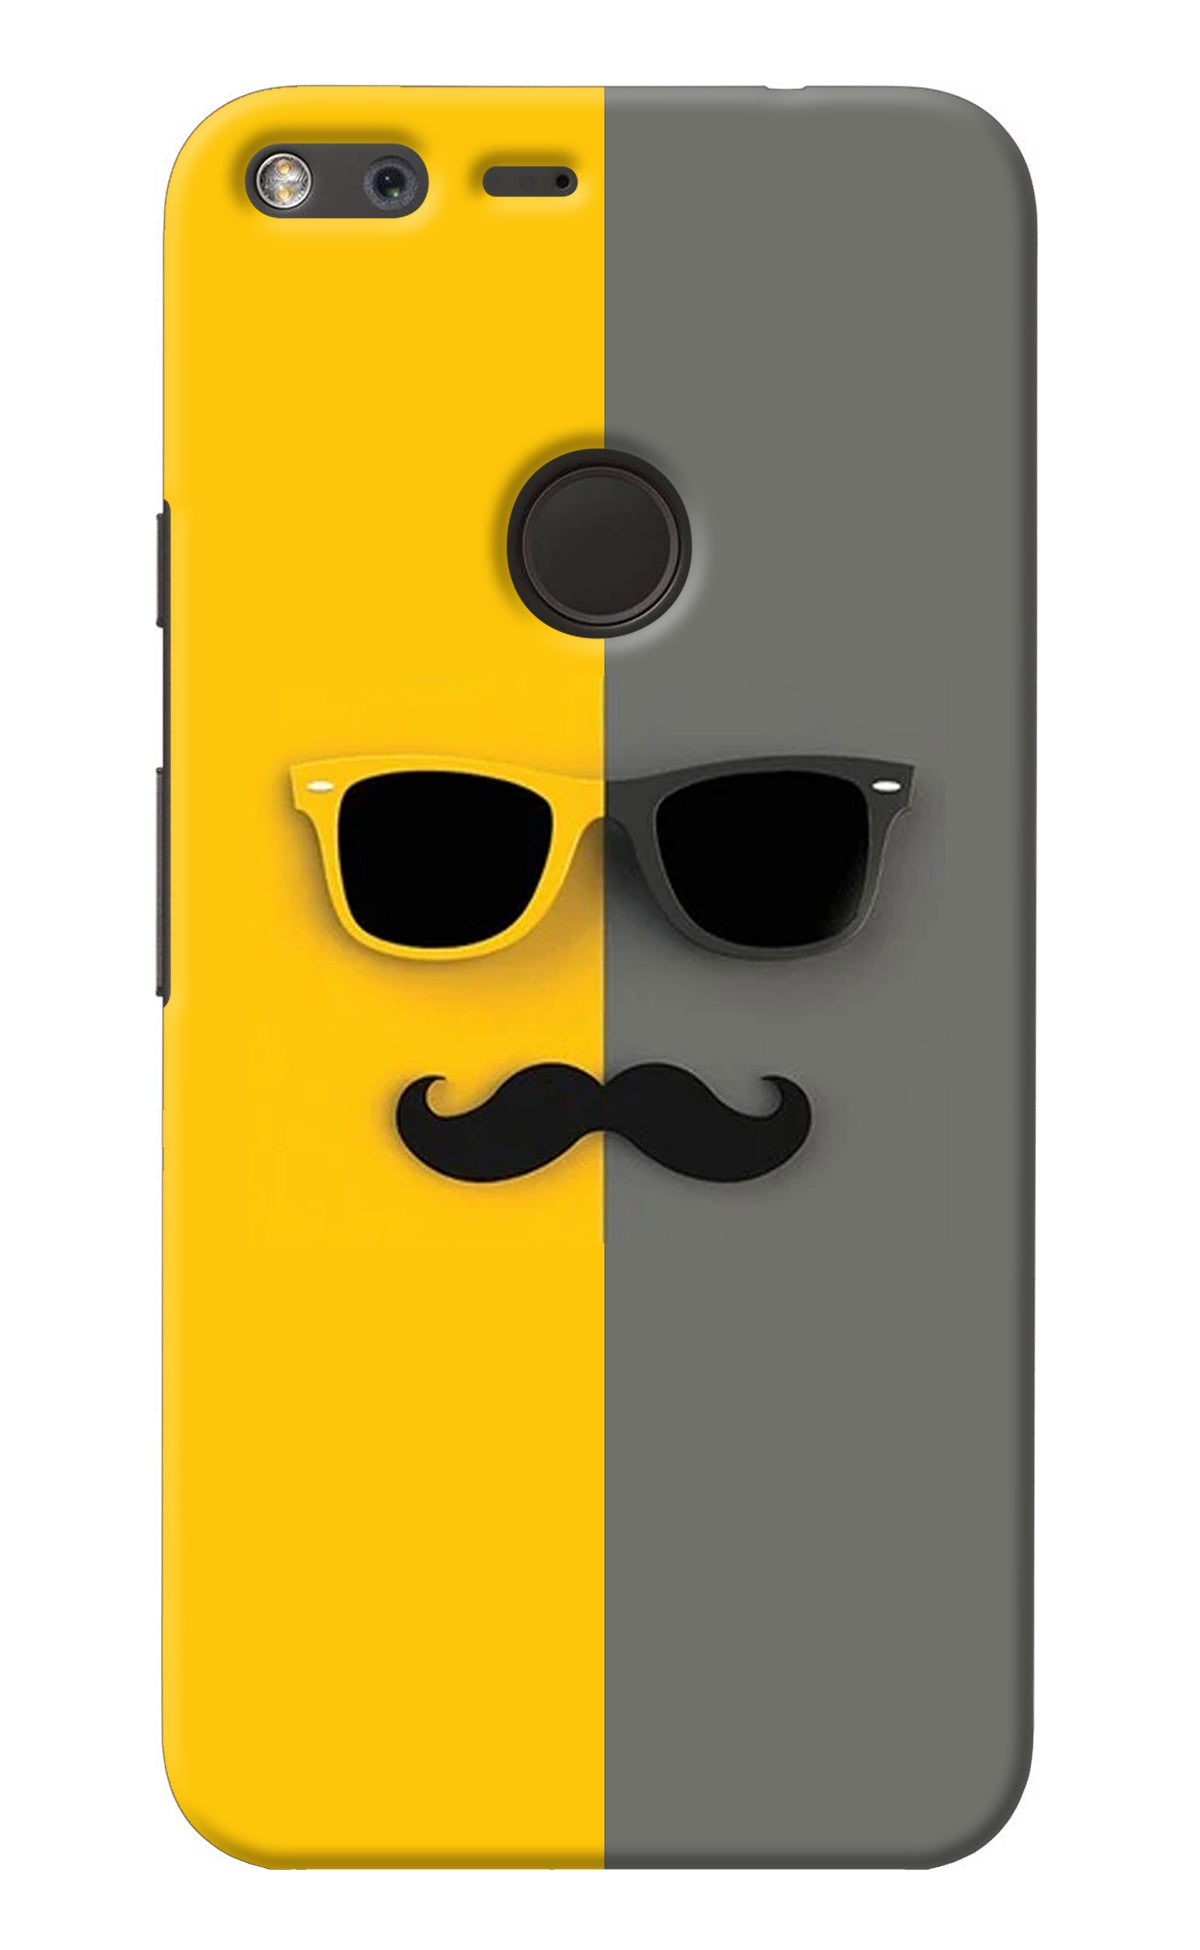 Sunglasses with Mustache Google Pixel XL Back Cover